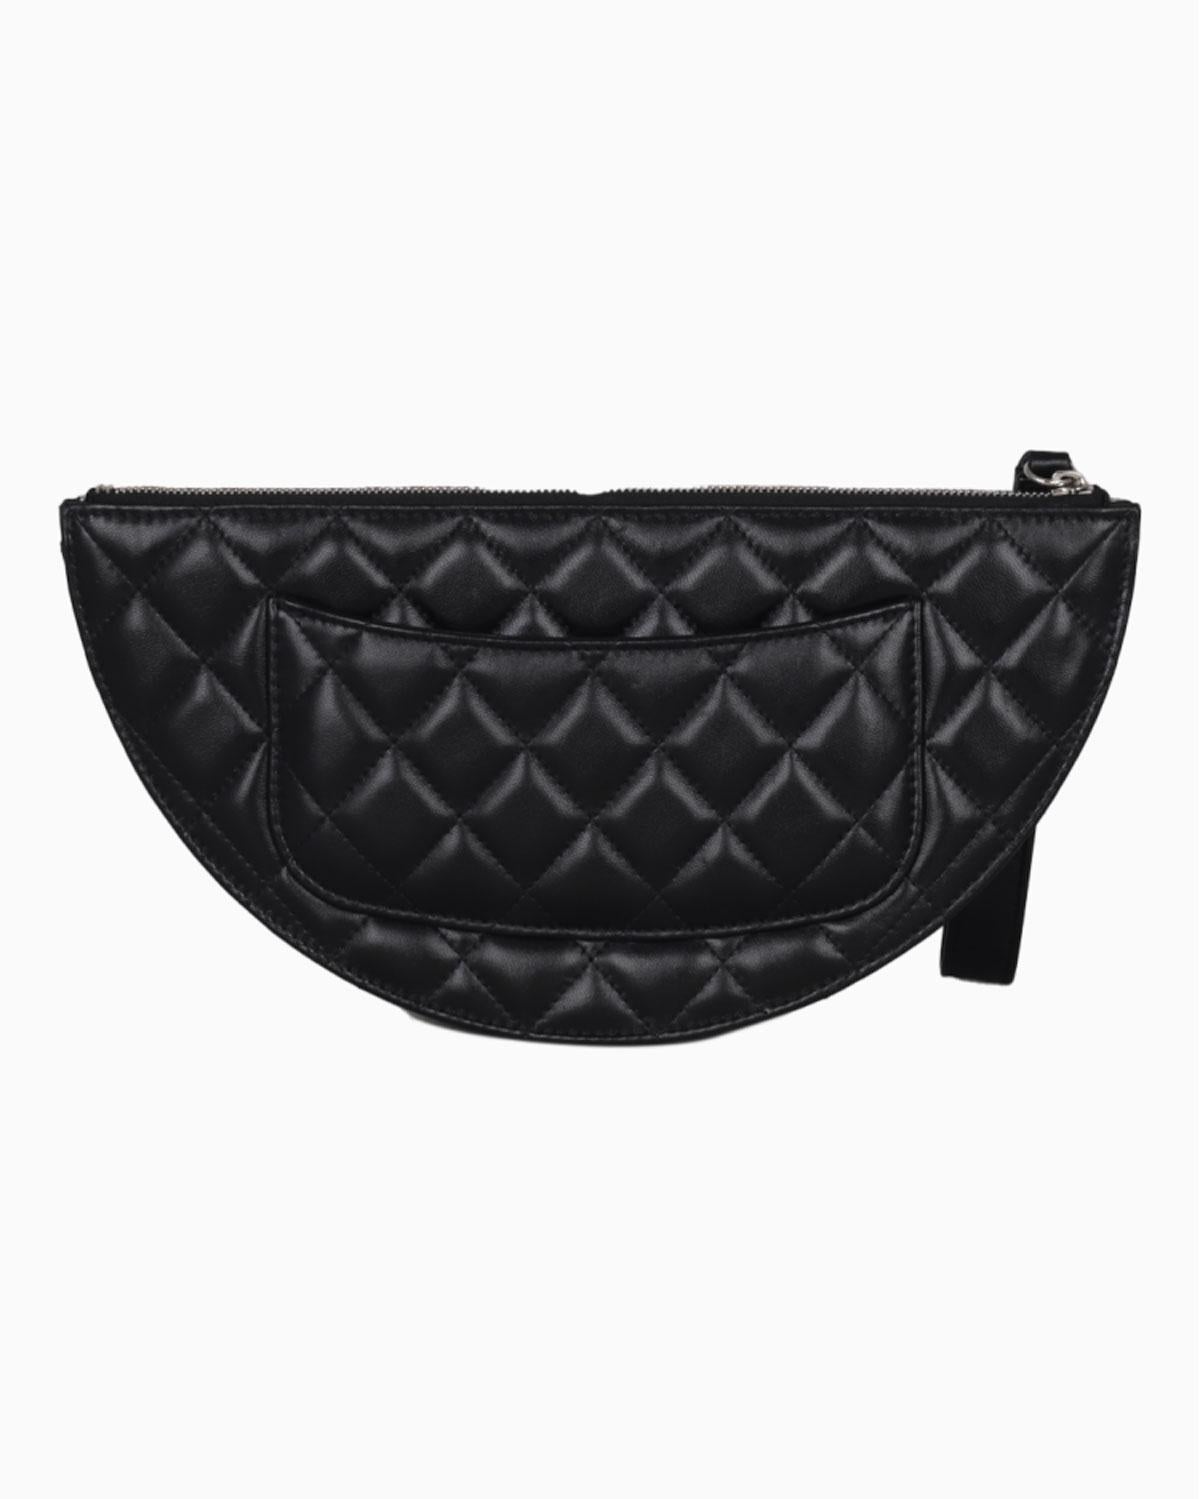 Women's Chanel 2020 Half Circle Wrinkled Metallic Silver Lambskin Quilted Classic Clutch For Sale